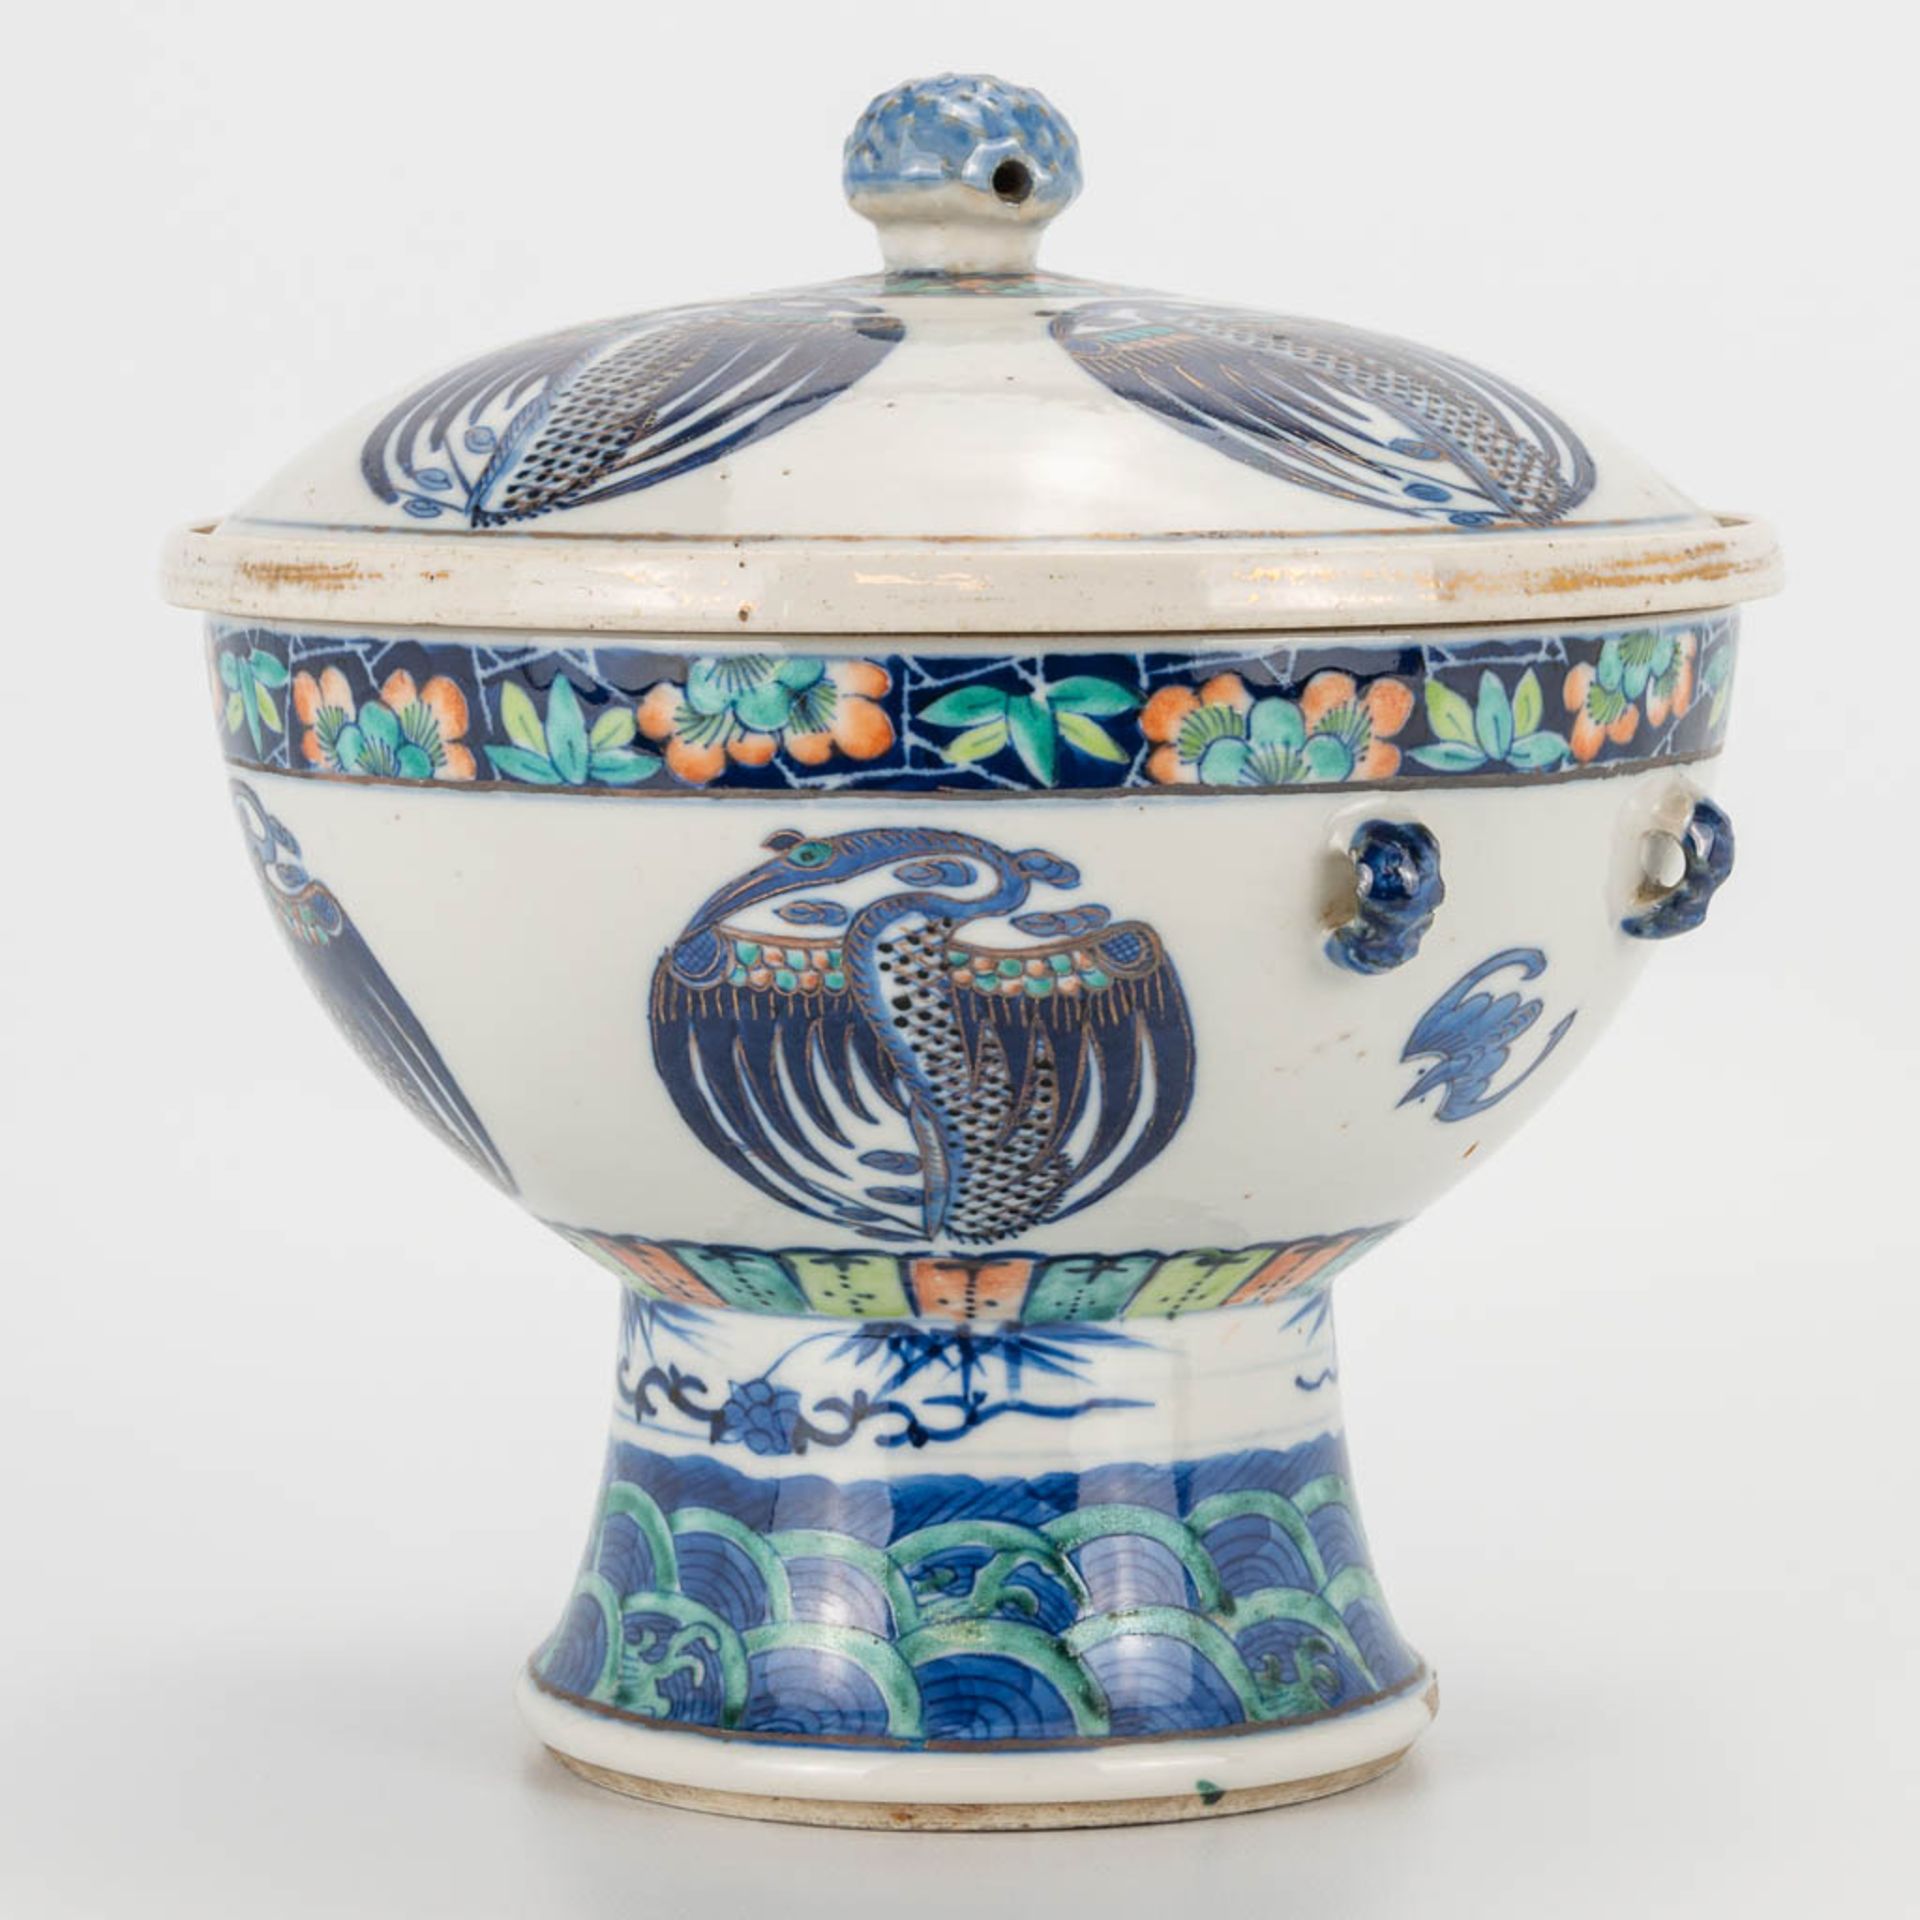 A 'Bain Marie' Douchai made of Chinese porcelain, Tching dinasty, 19th century.Ê (21 x 20 cm) - Image 11 of 16